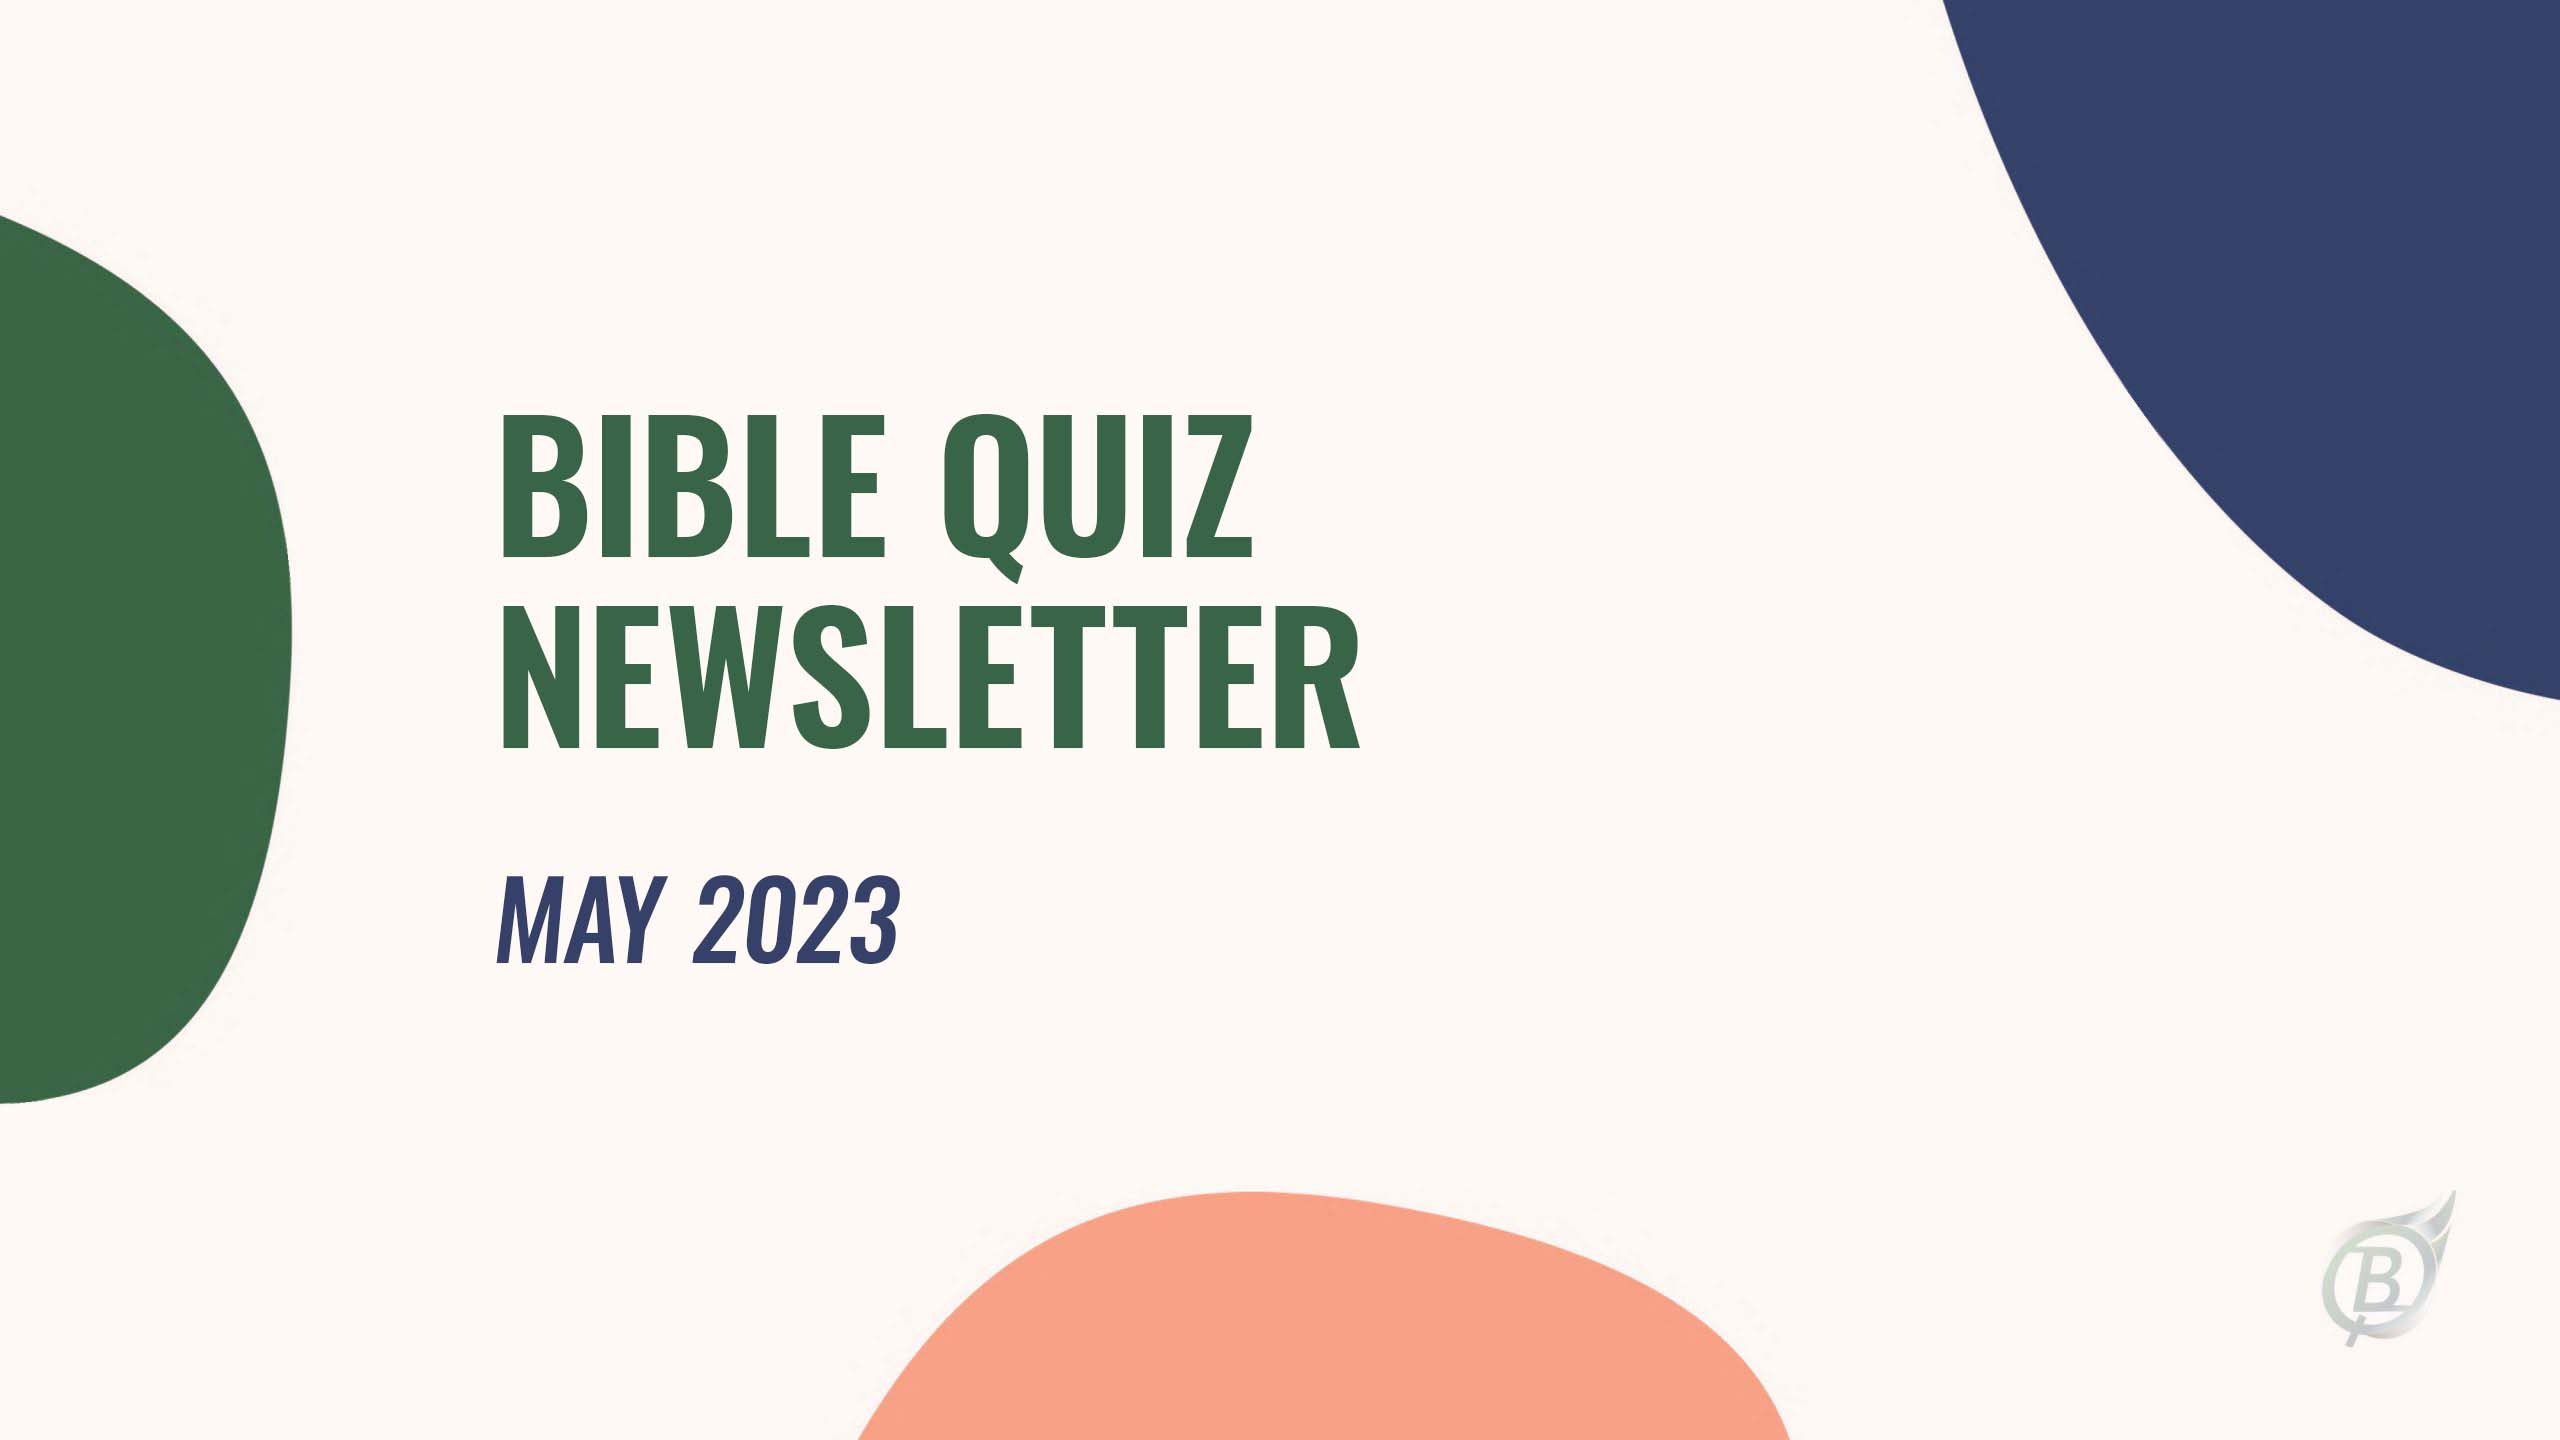 Bible Quiz Newsletter - May 2023